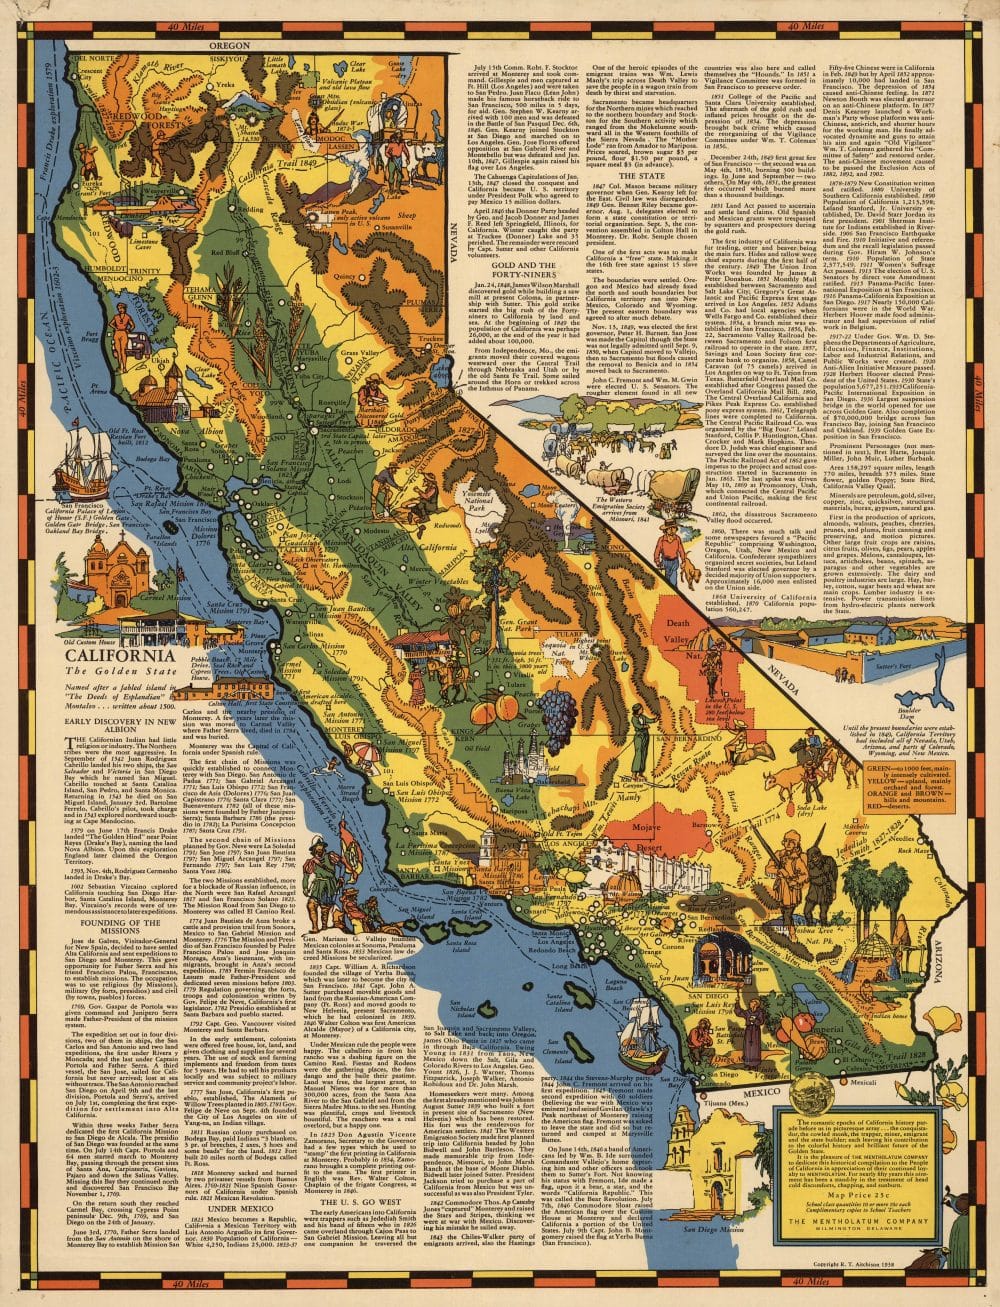 California, the Golden State by R.T. Aitchison